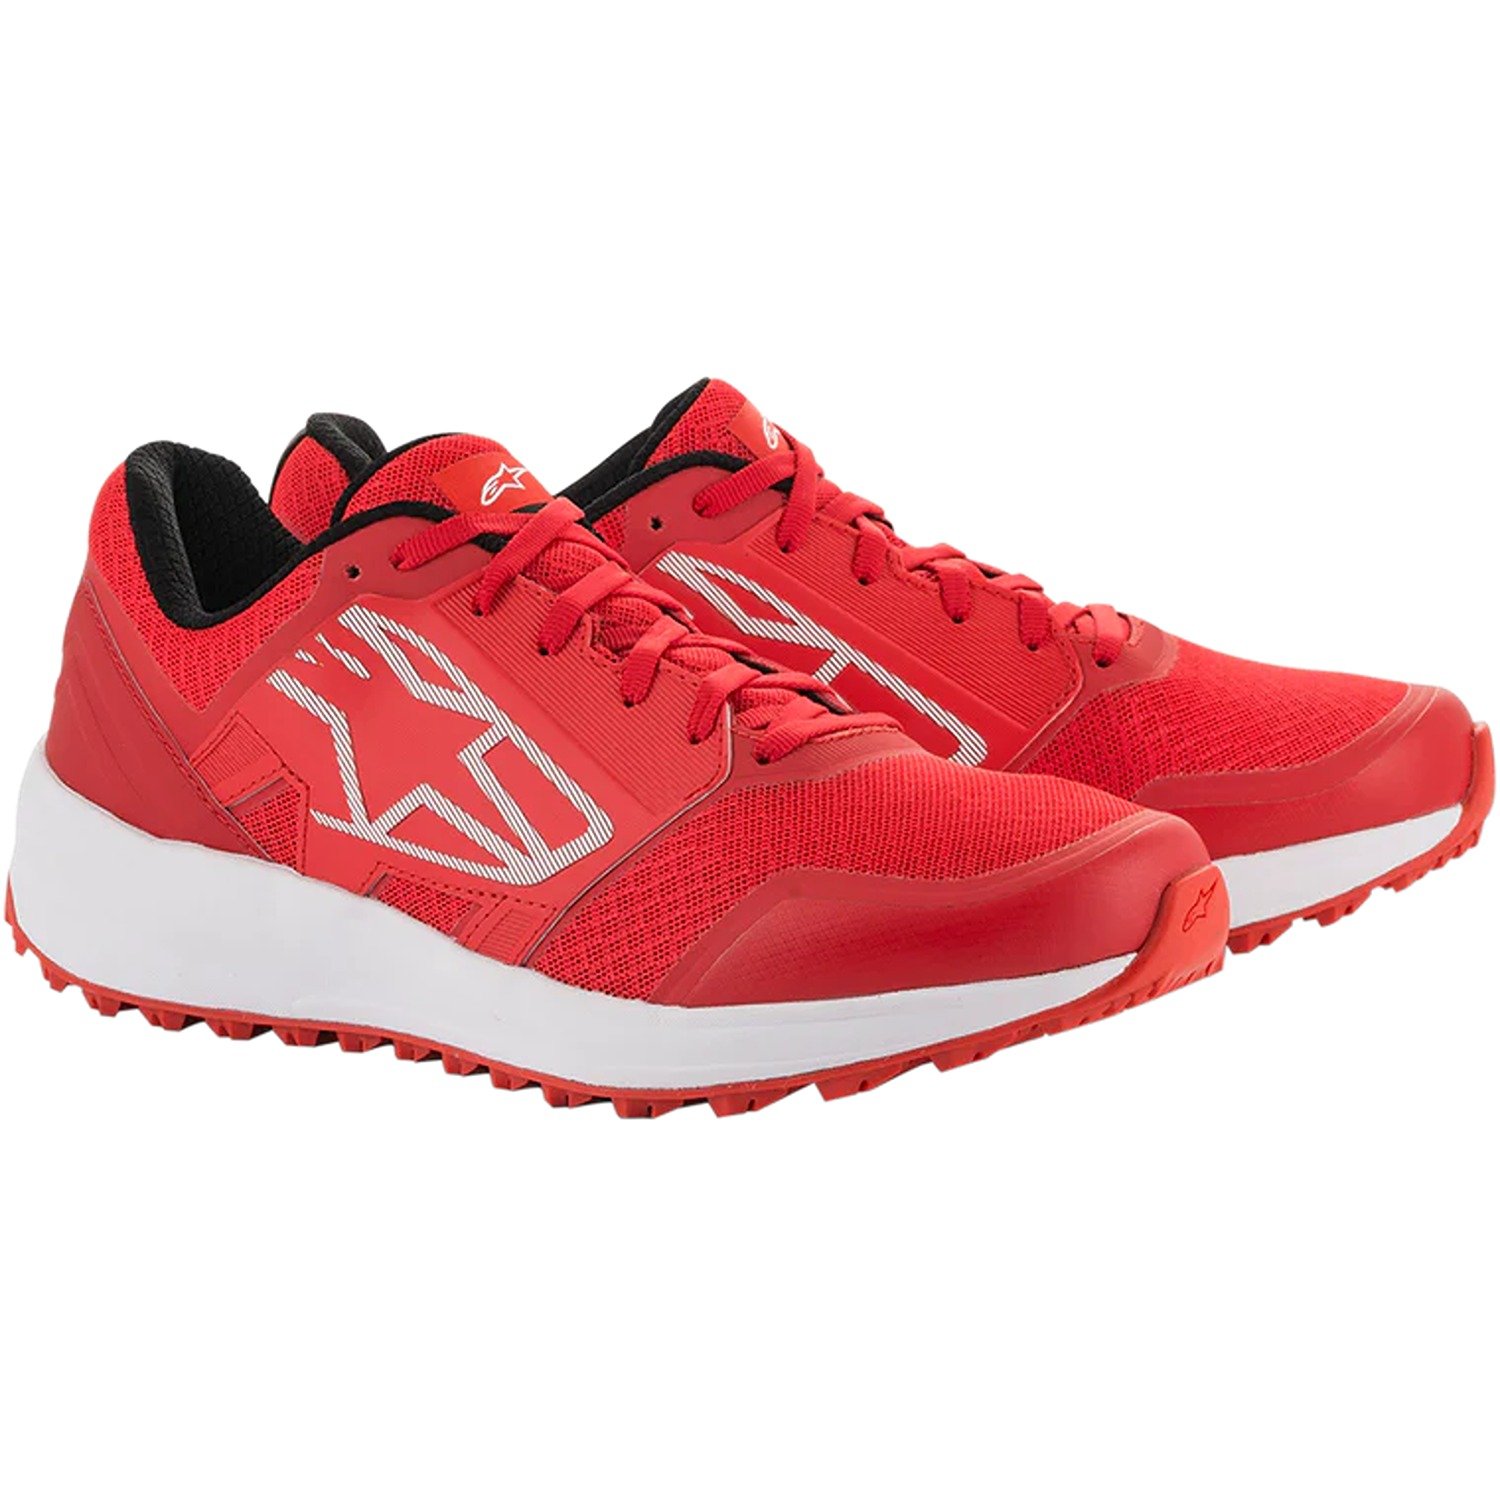 Image of EU Alpinestars Meta Trail Shoes Red White Taille US 55